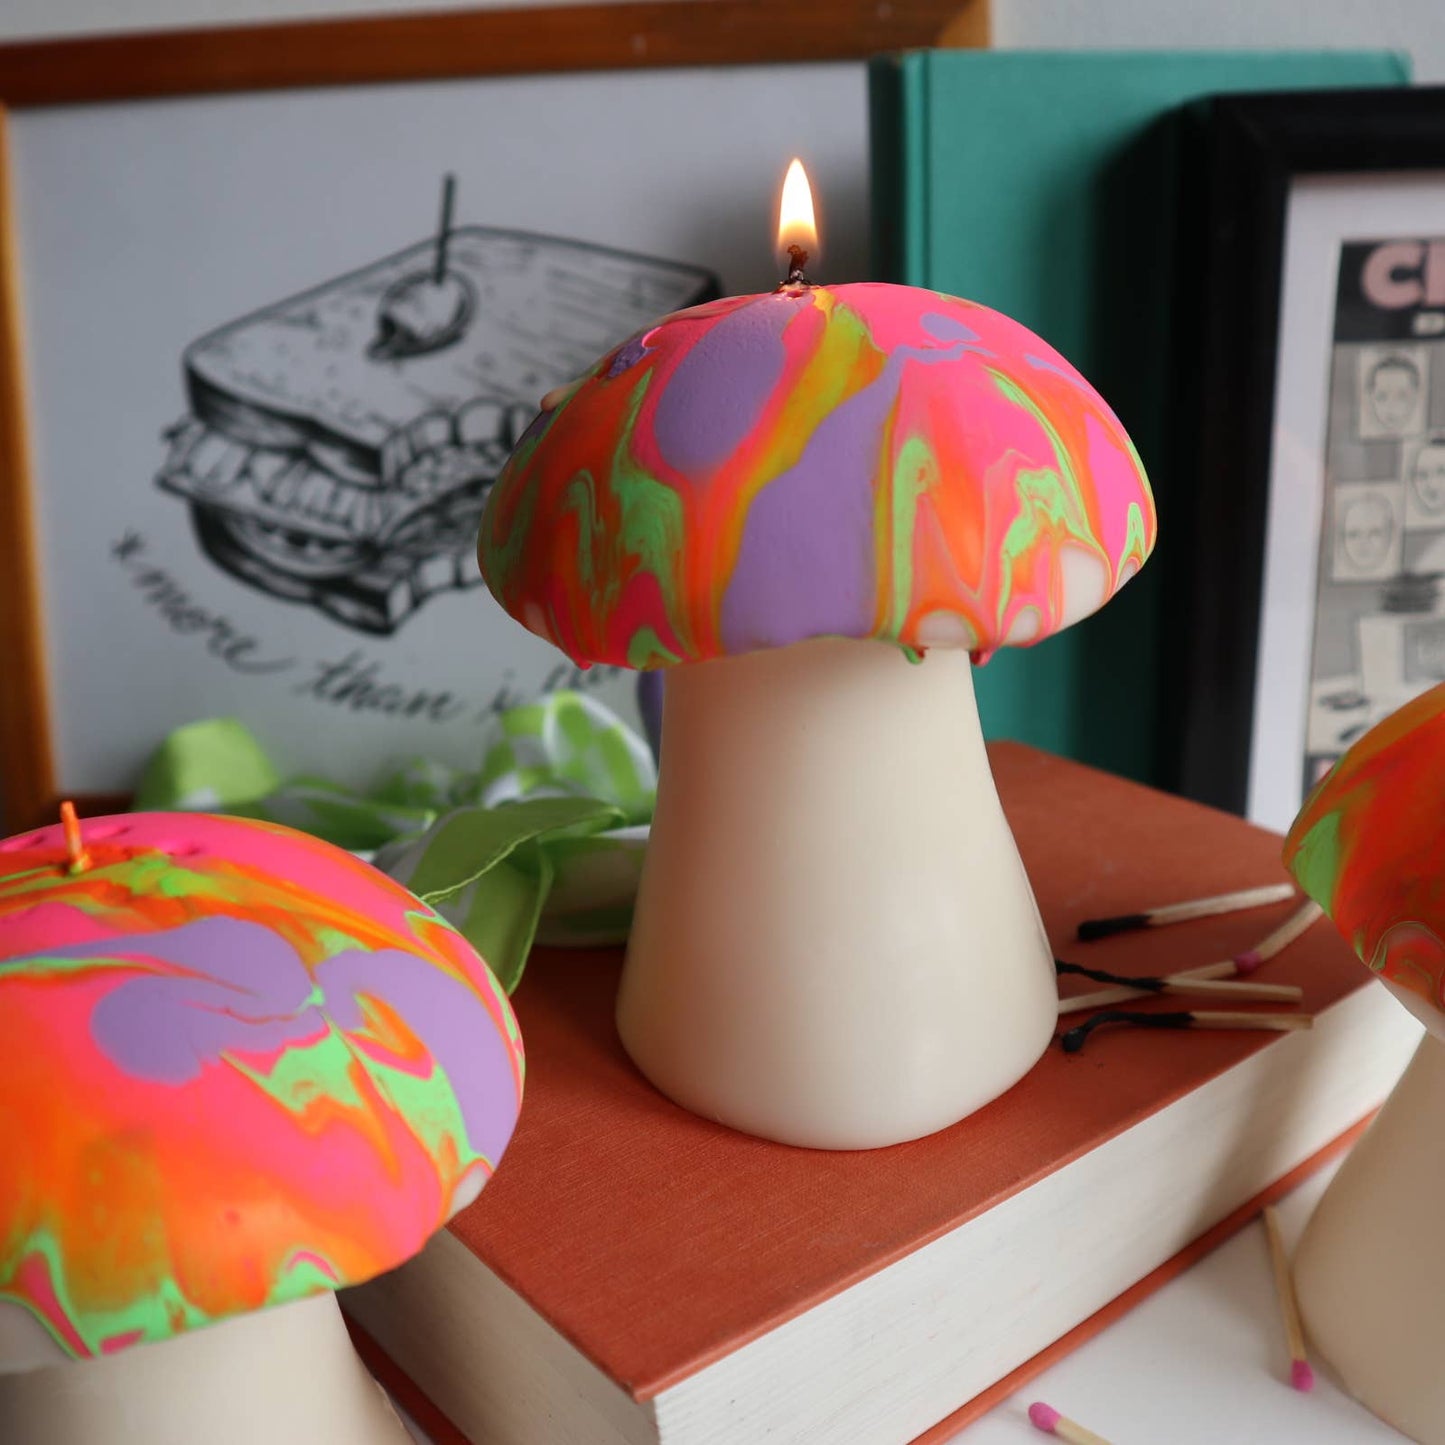 Psychedelic Mushroom Candle